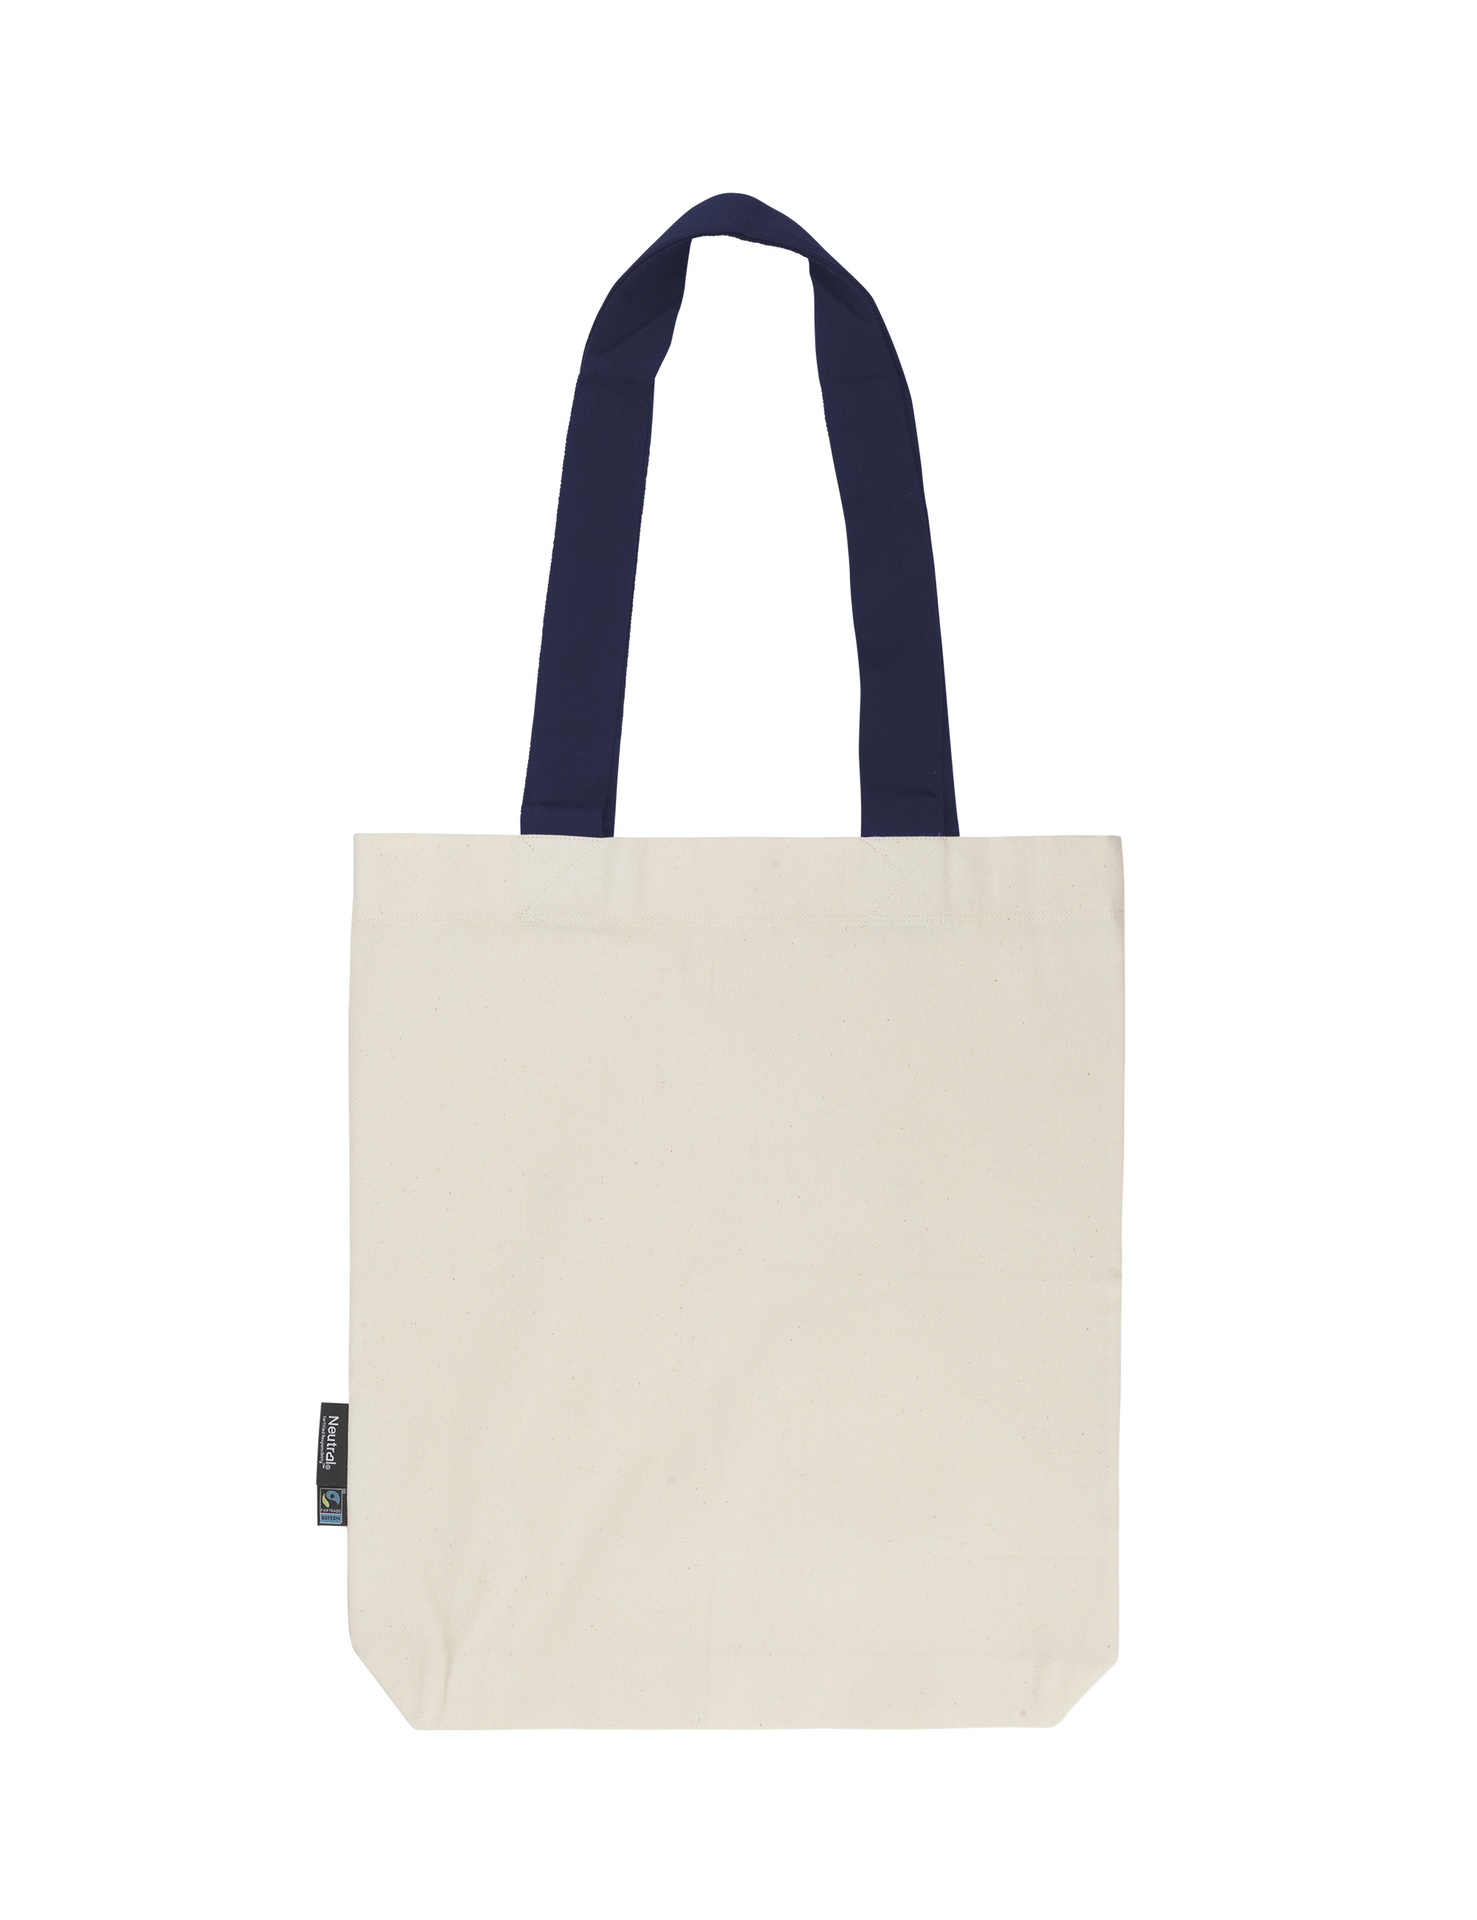 [PR/05775] Twill Bag With Contrast Handles (Nature/Navy 04)